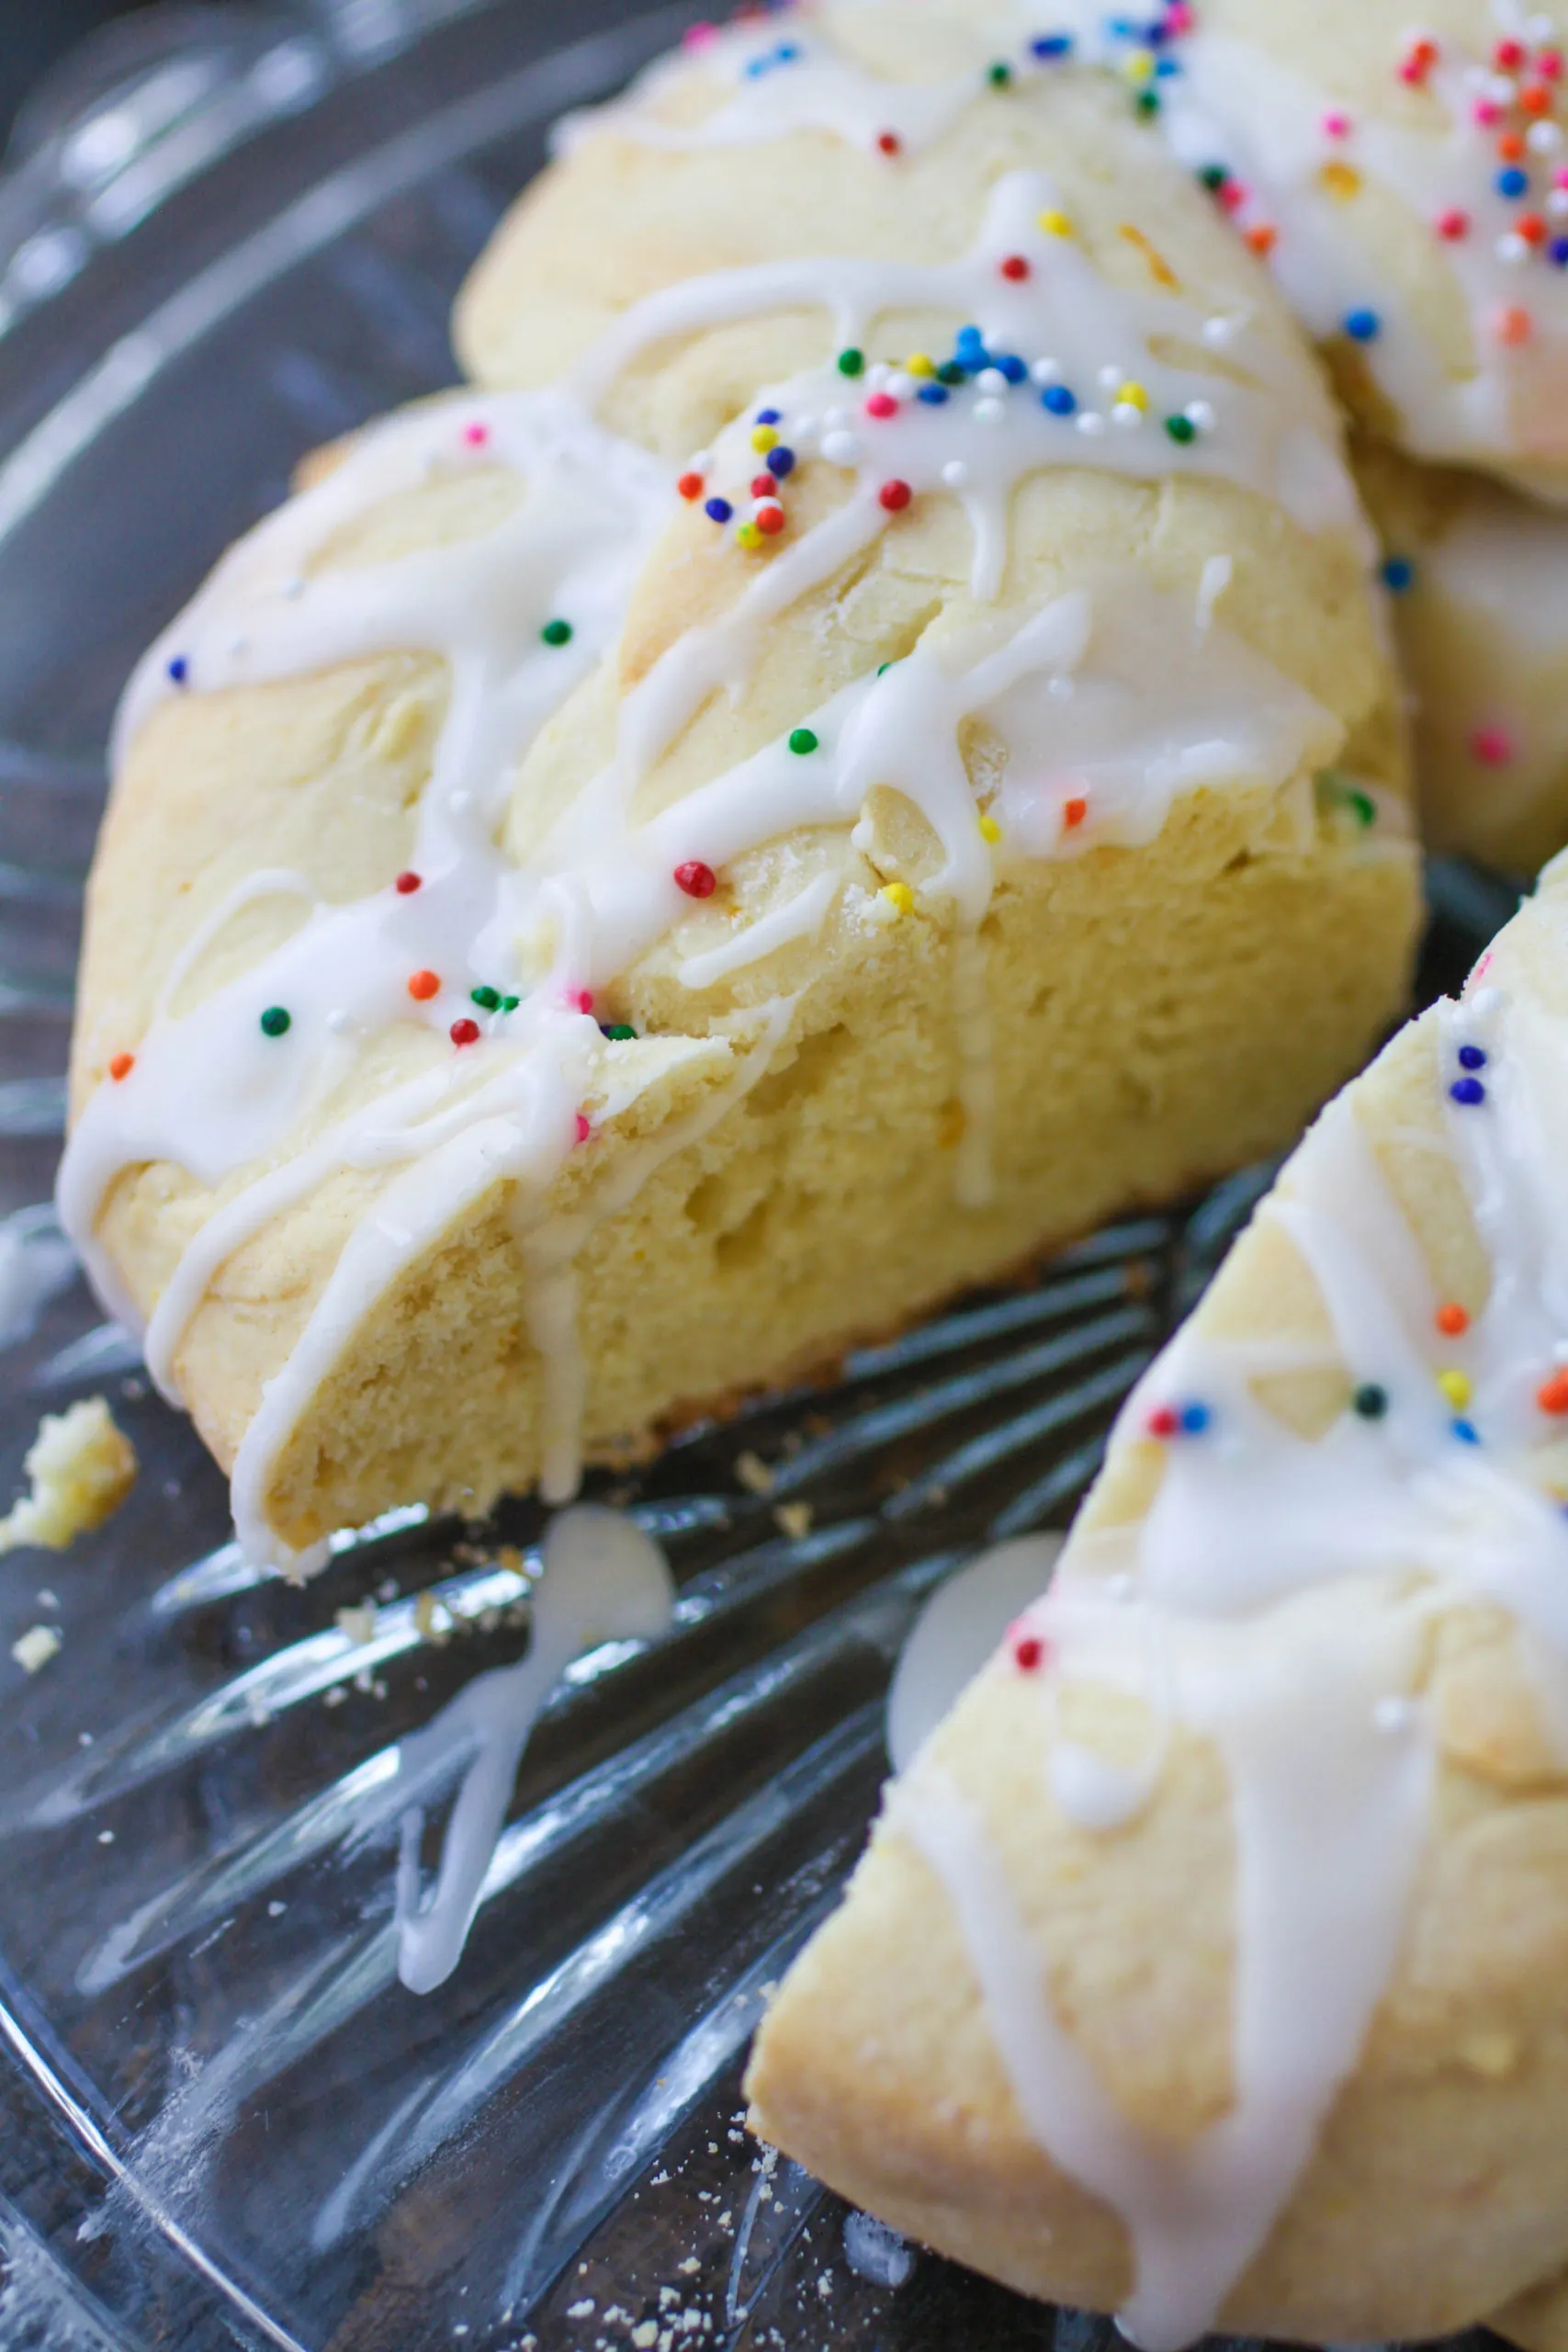 No-Rise Italian Easter Bread is lovely for a dessert this season.